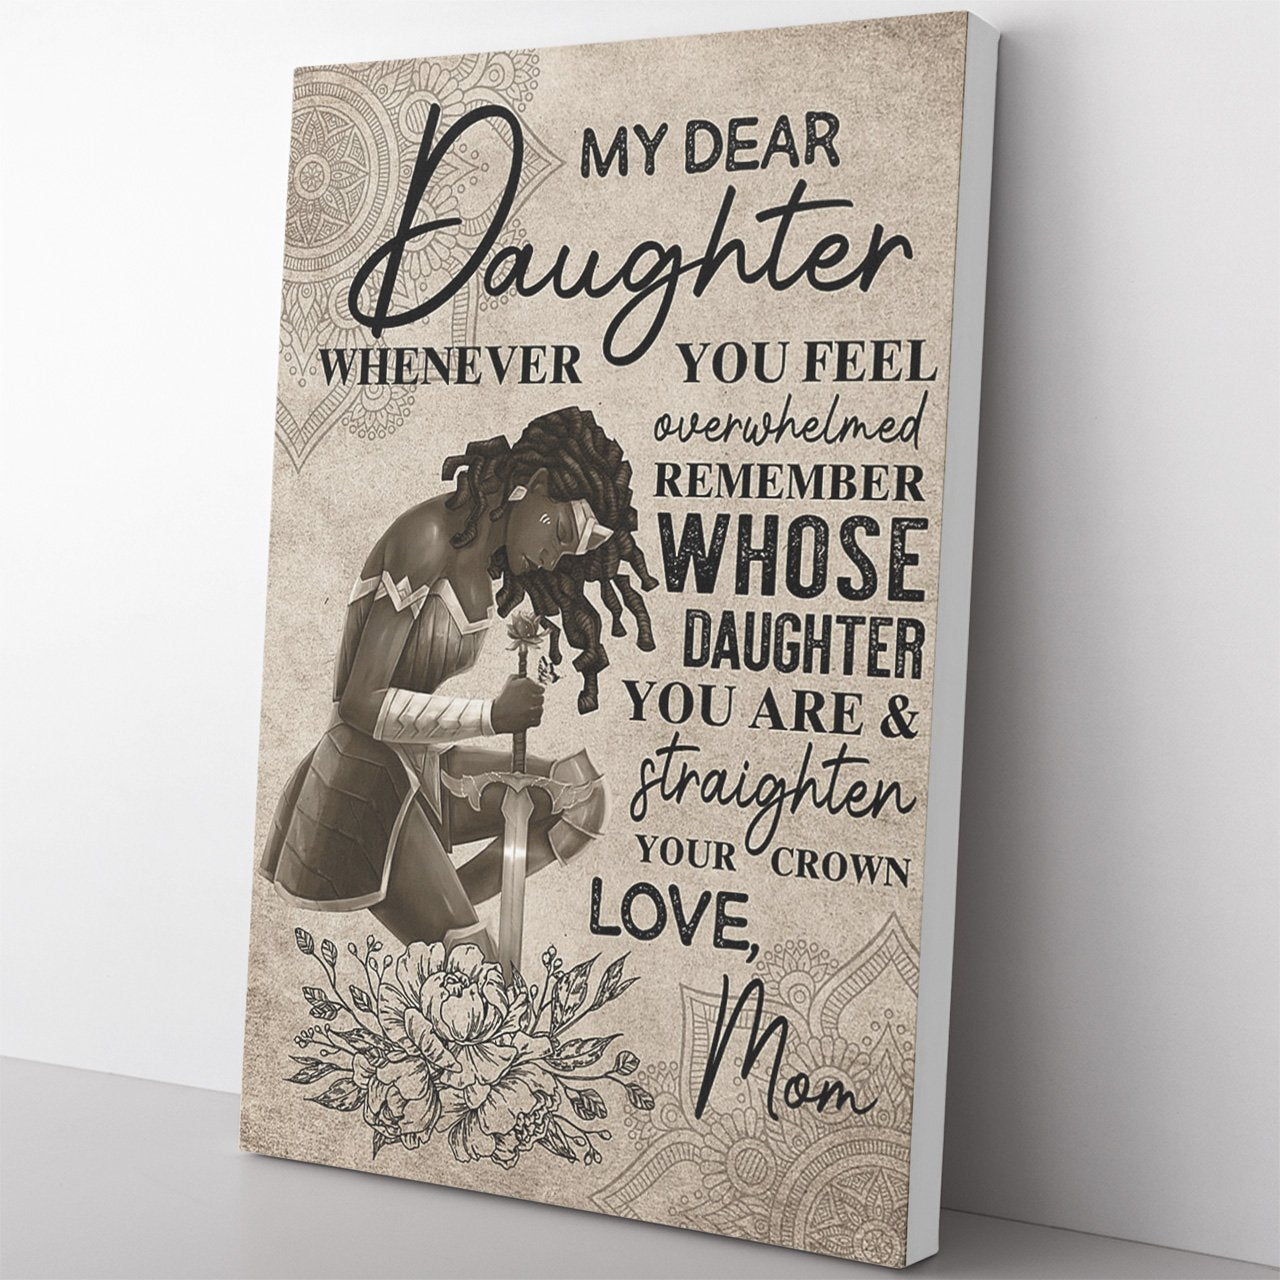 Black Warrior Daughter Canvas Gift, Remember Whose Daughter You Are, Straighten Your Crown Canvas from Mom, Sentimental Graduation Gifts For Daughter